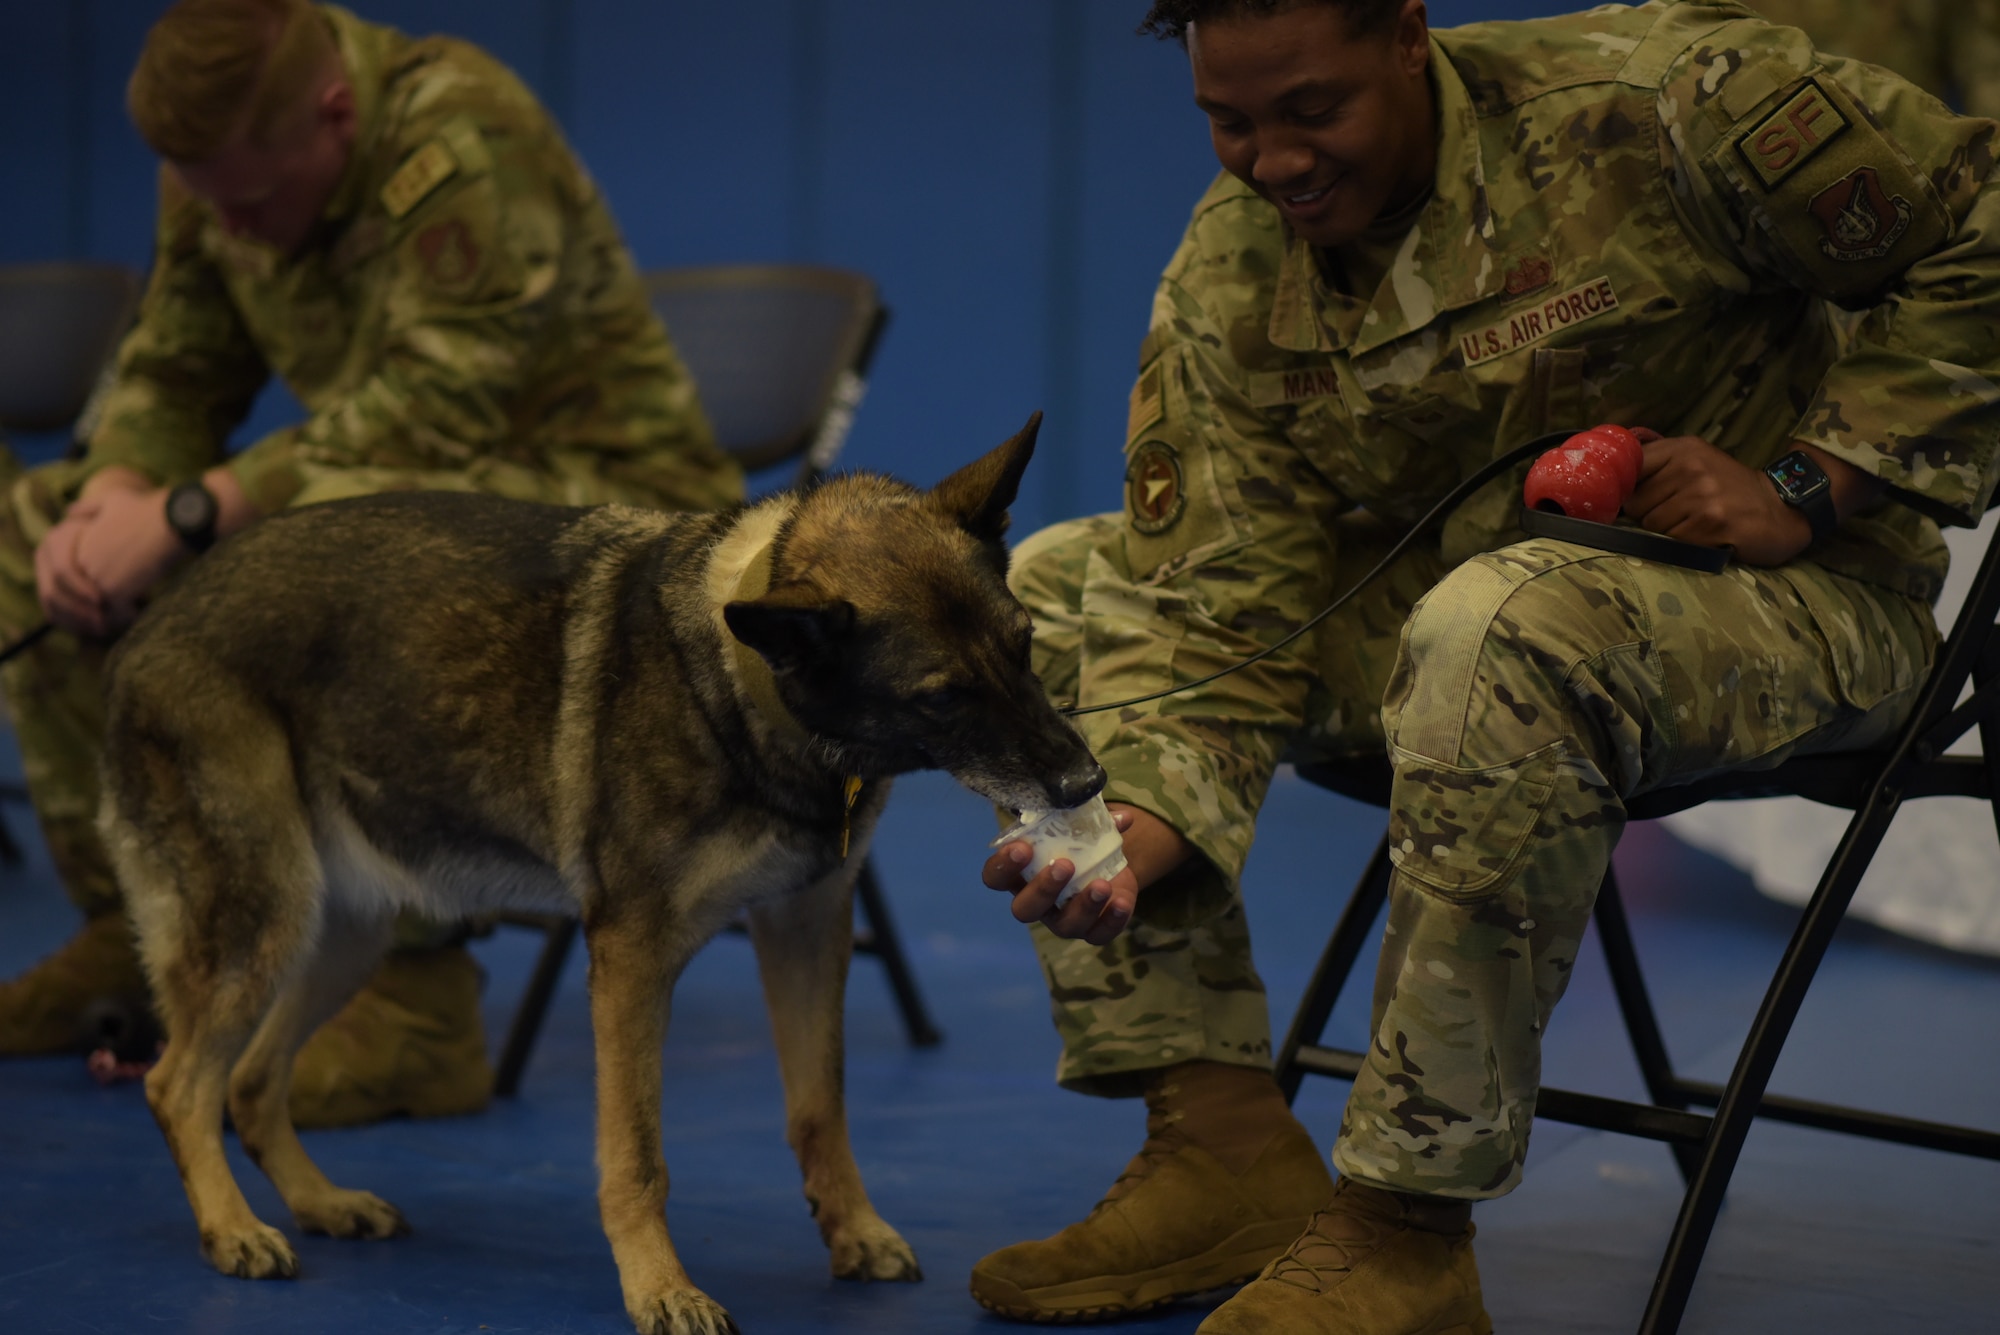 U.S. Air Force Tech. Sgt. Michael Mandel, 36th Security Forces Squadron Military Working Dog handler, feeds MWD Foxie a cup of whipped cream after a MWD retirement ceremony at Andersen Air Force Base on March 23, 2022. The ceremony recognized four dogs with a combined 29 years of service. (U.S. Air Force photo by Airman 1st Class Emily Saxton)